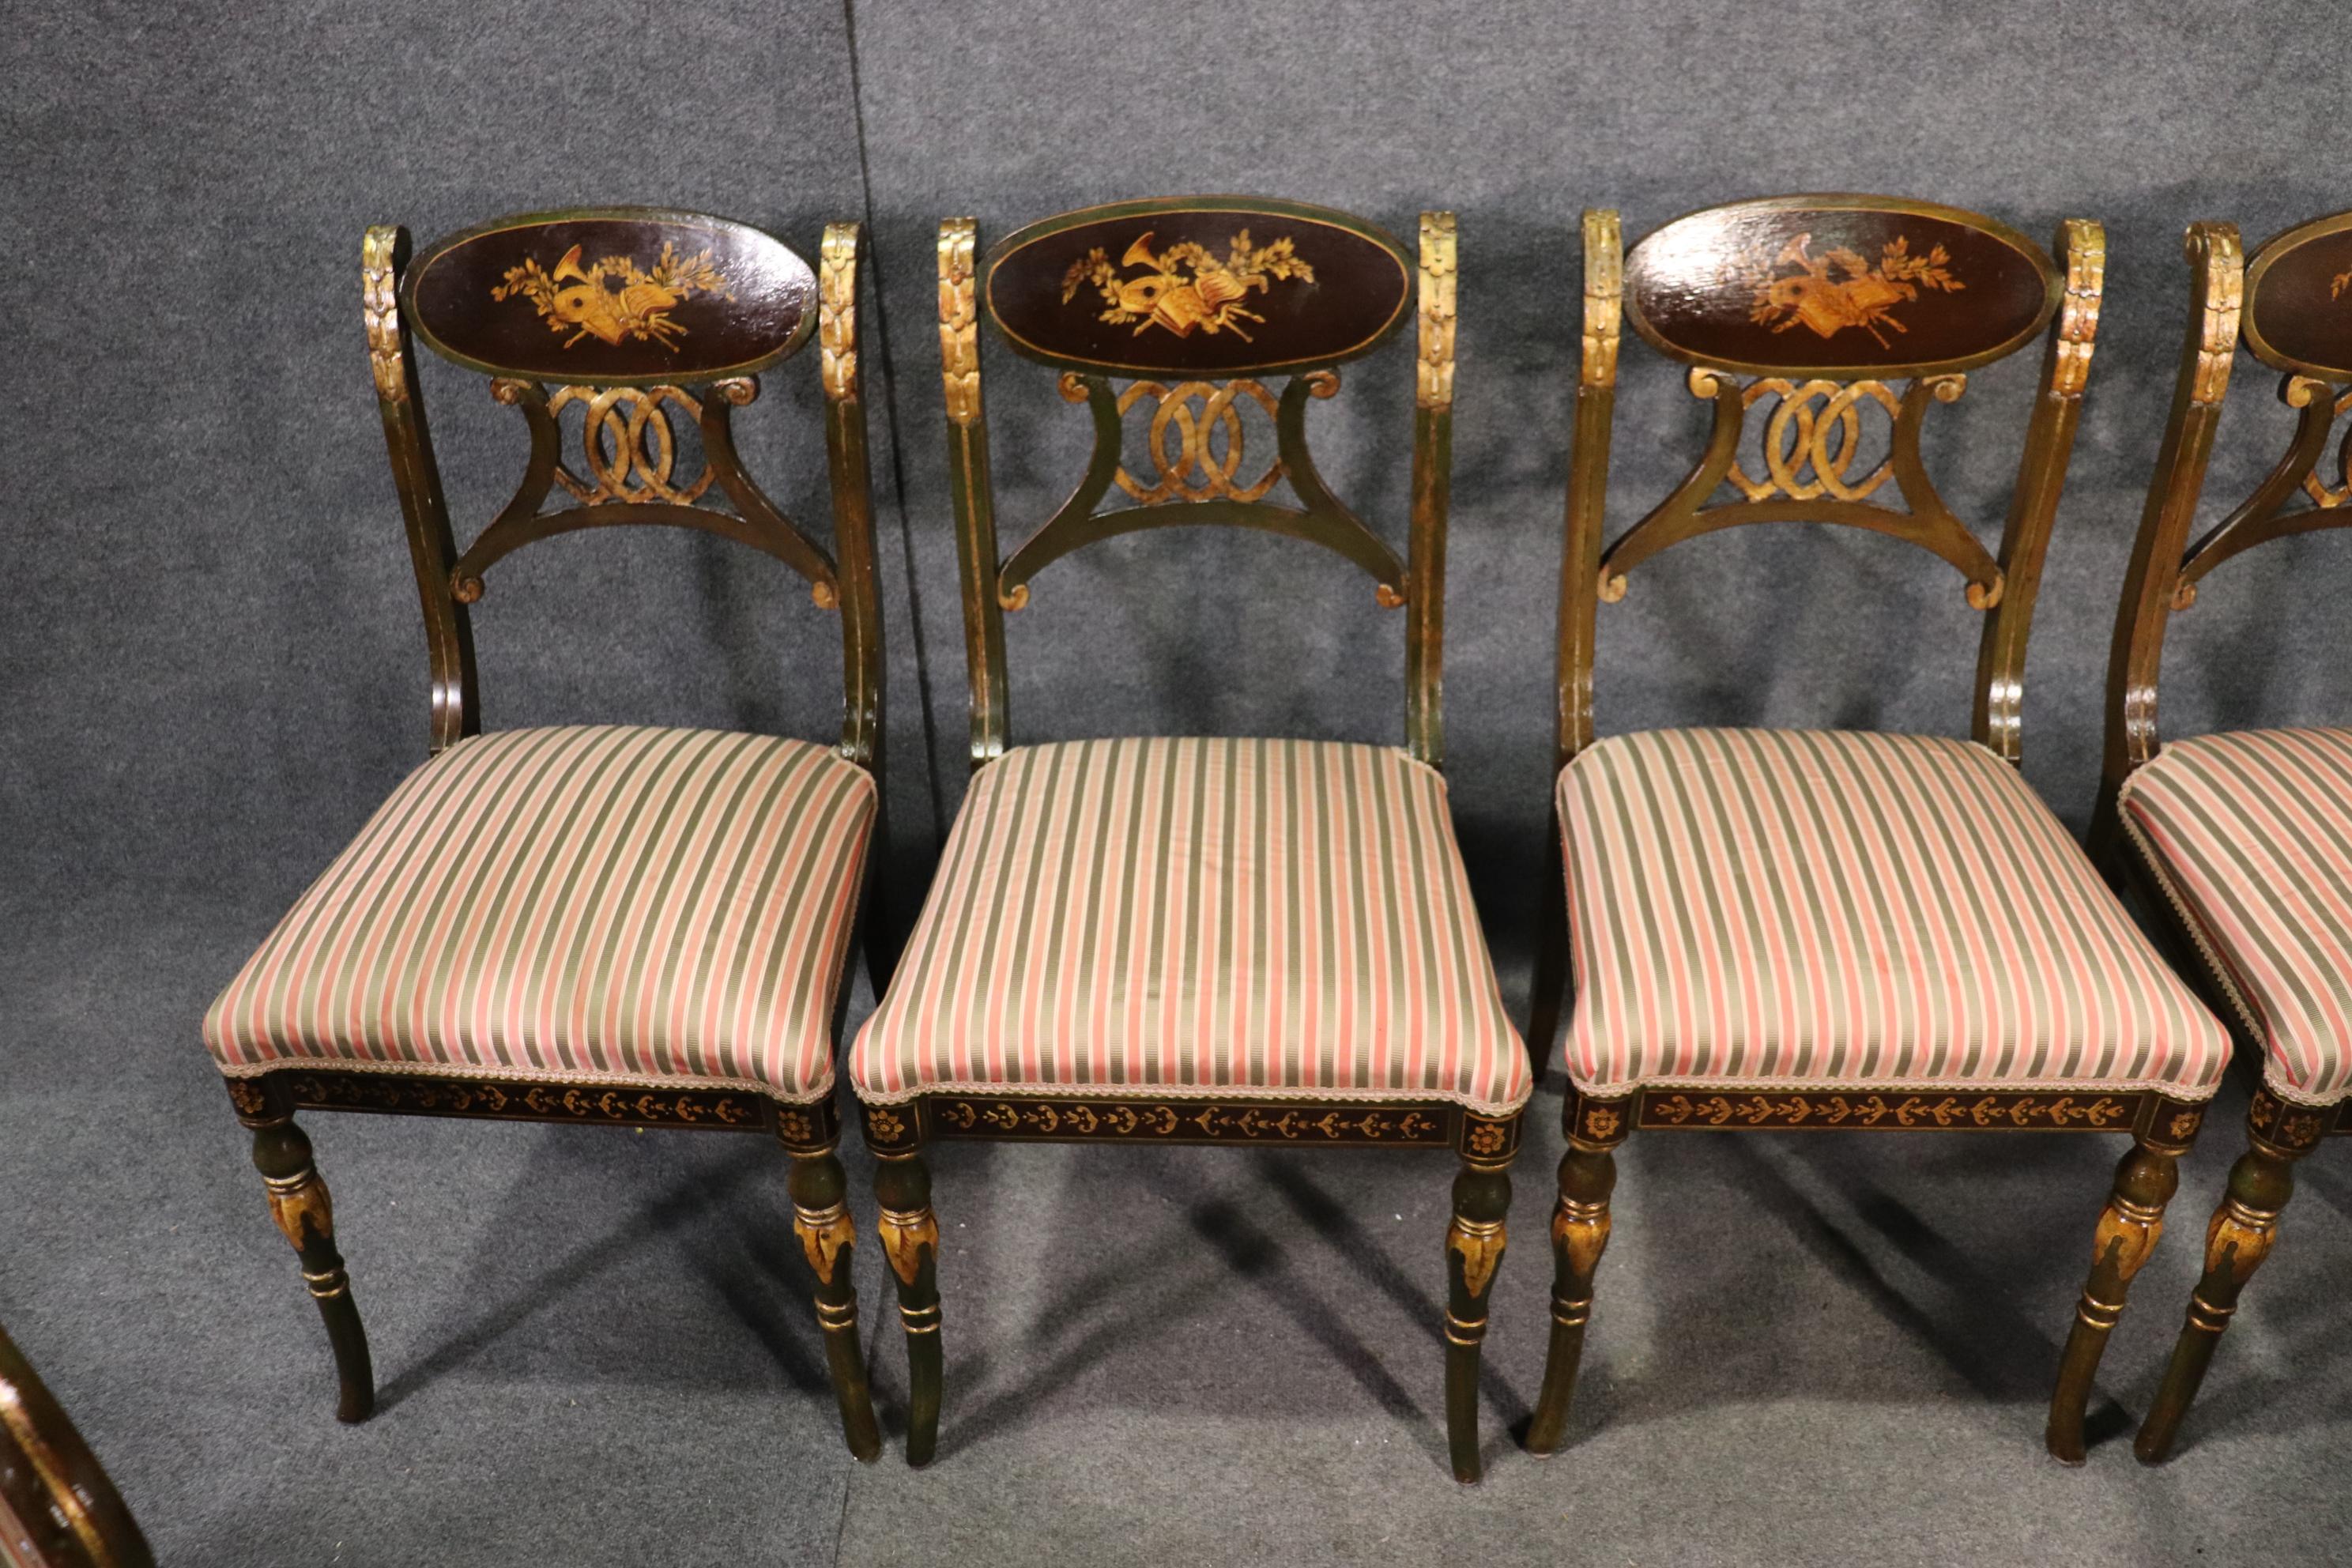 Set 8 Painted and Gilded Regency Style Dining Chairs with Musical Instruments  1